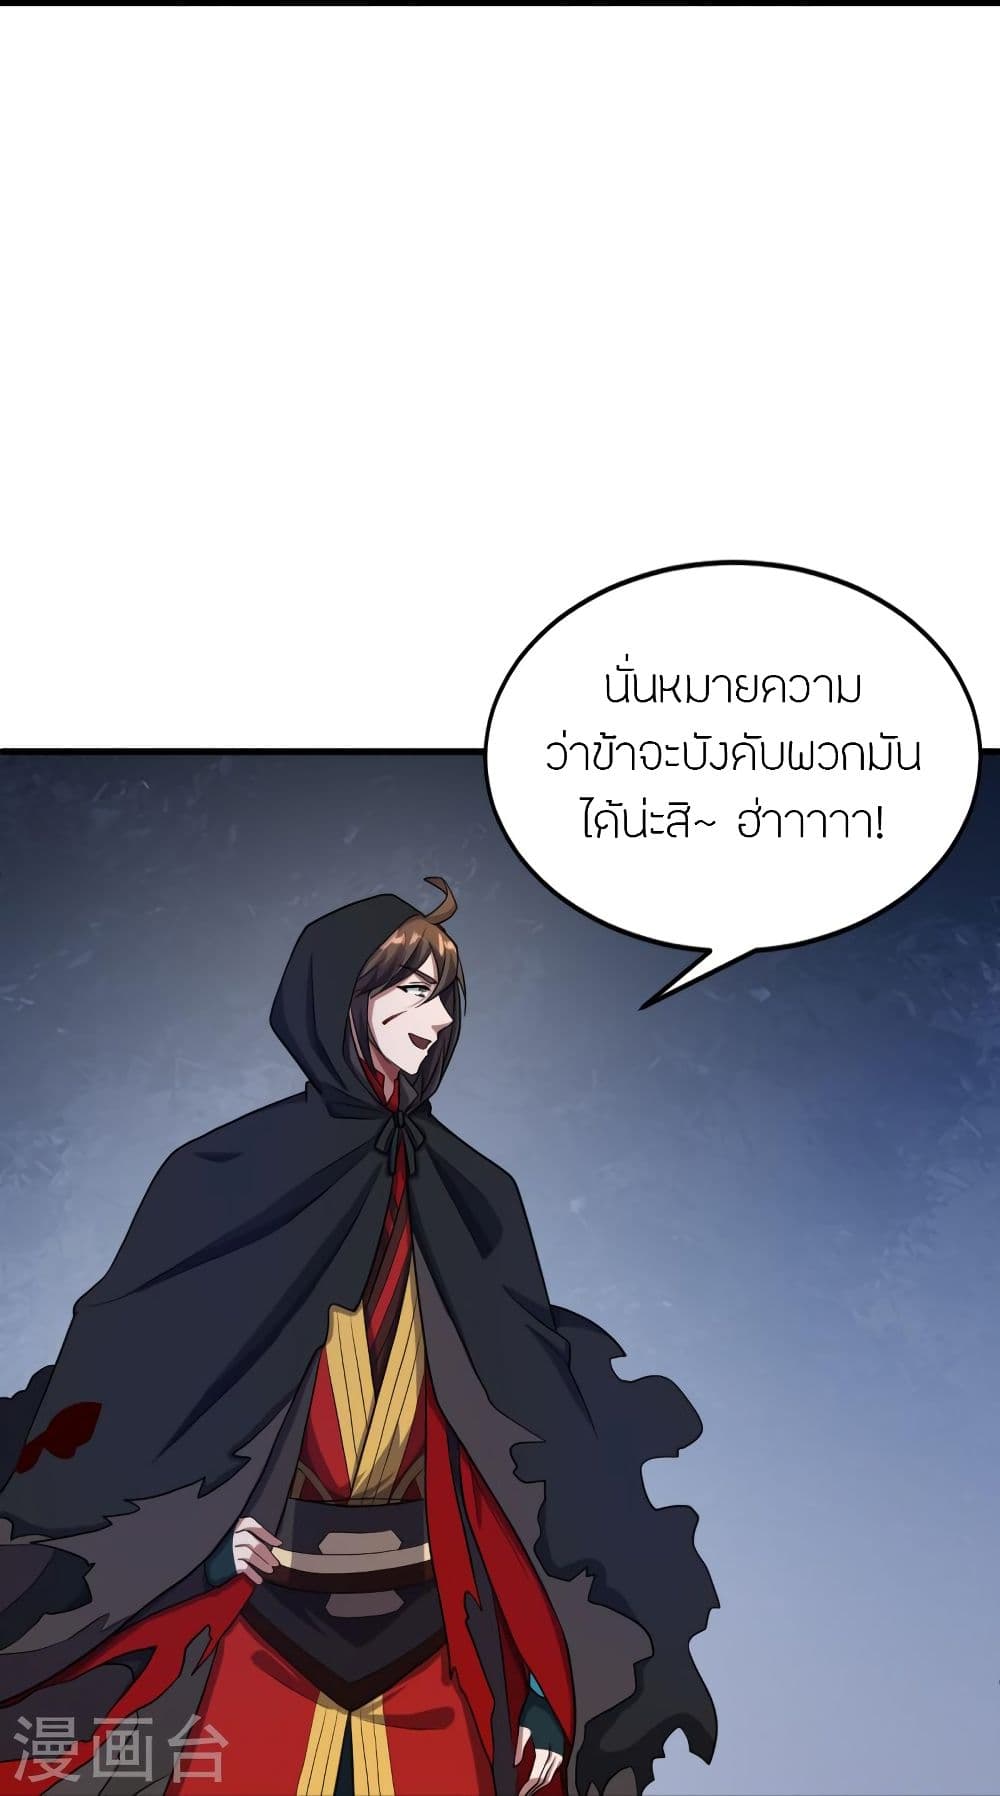 Banished Disciple's Counterattack เธเธฑเธเธฃเธเธฃเธฃเธ”เธดเน€เธเธตเธขเธเธขเธธเธ—เธ 304 (81)